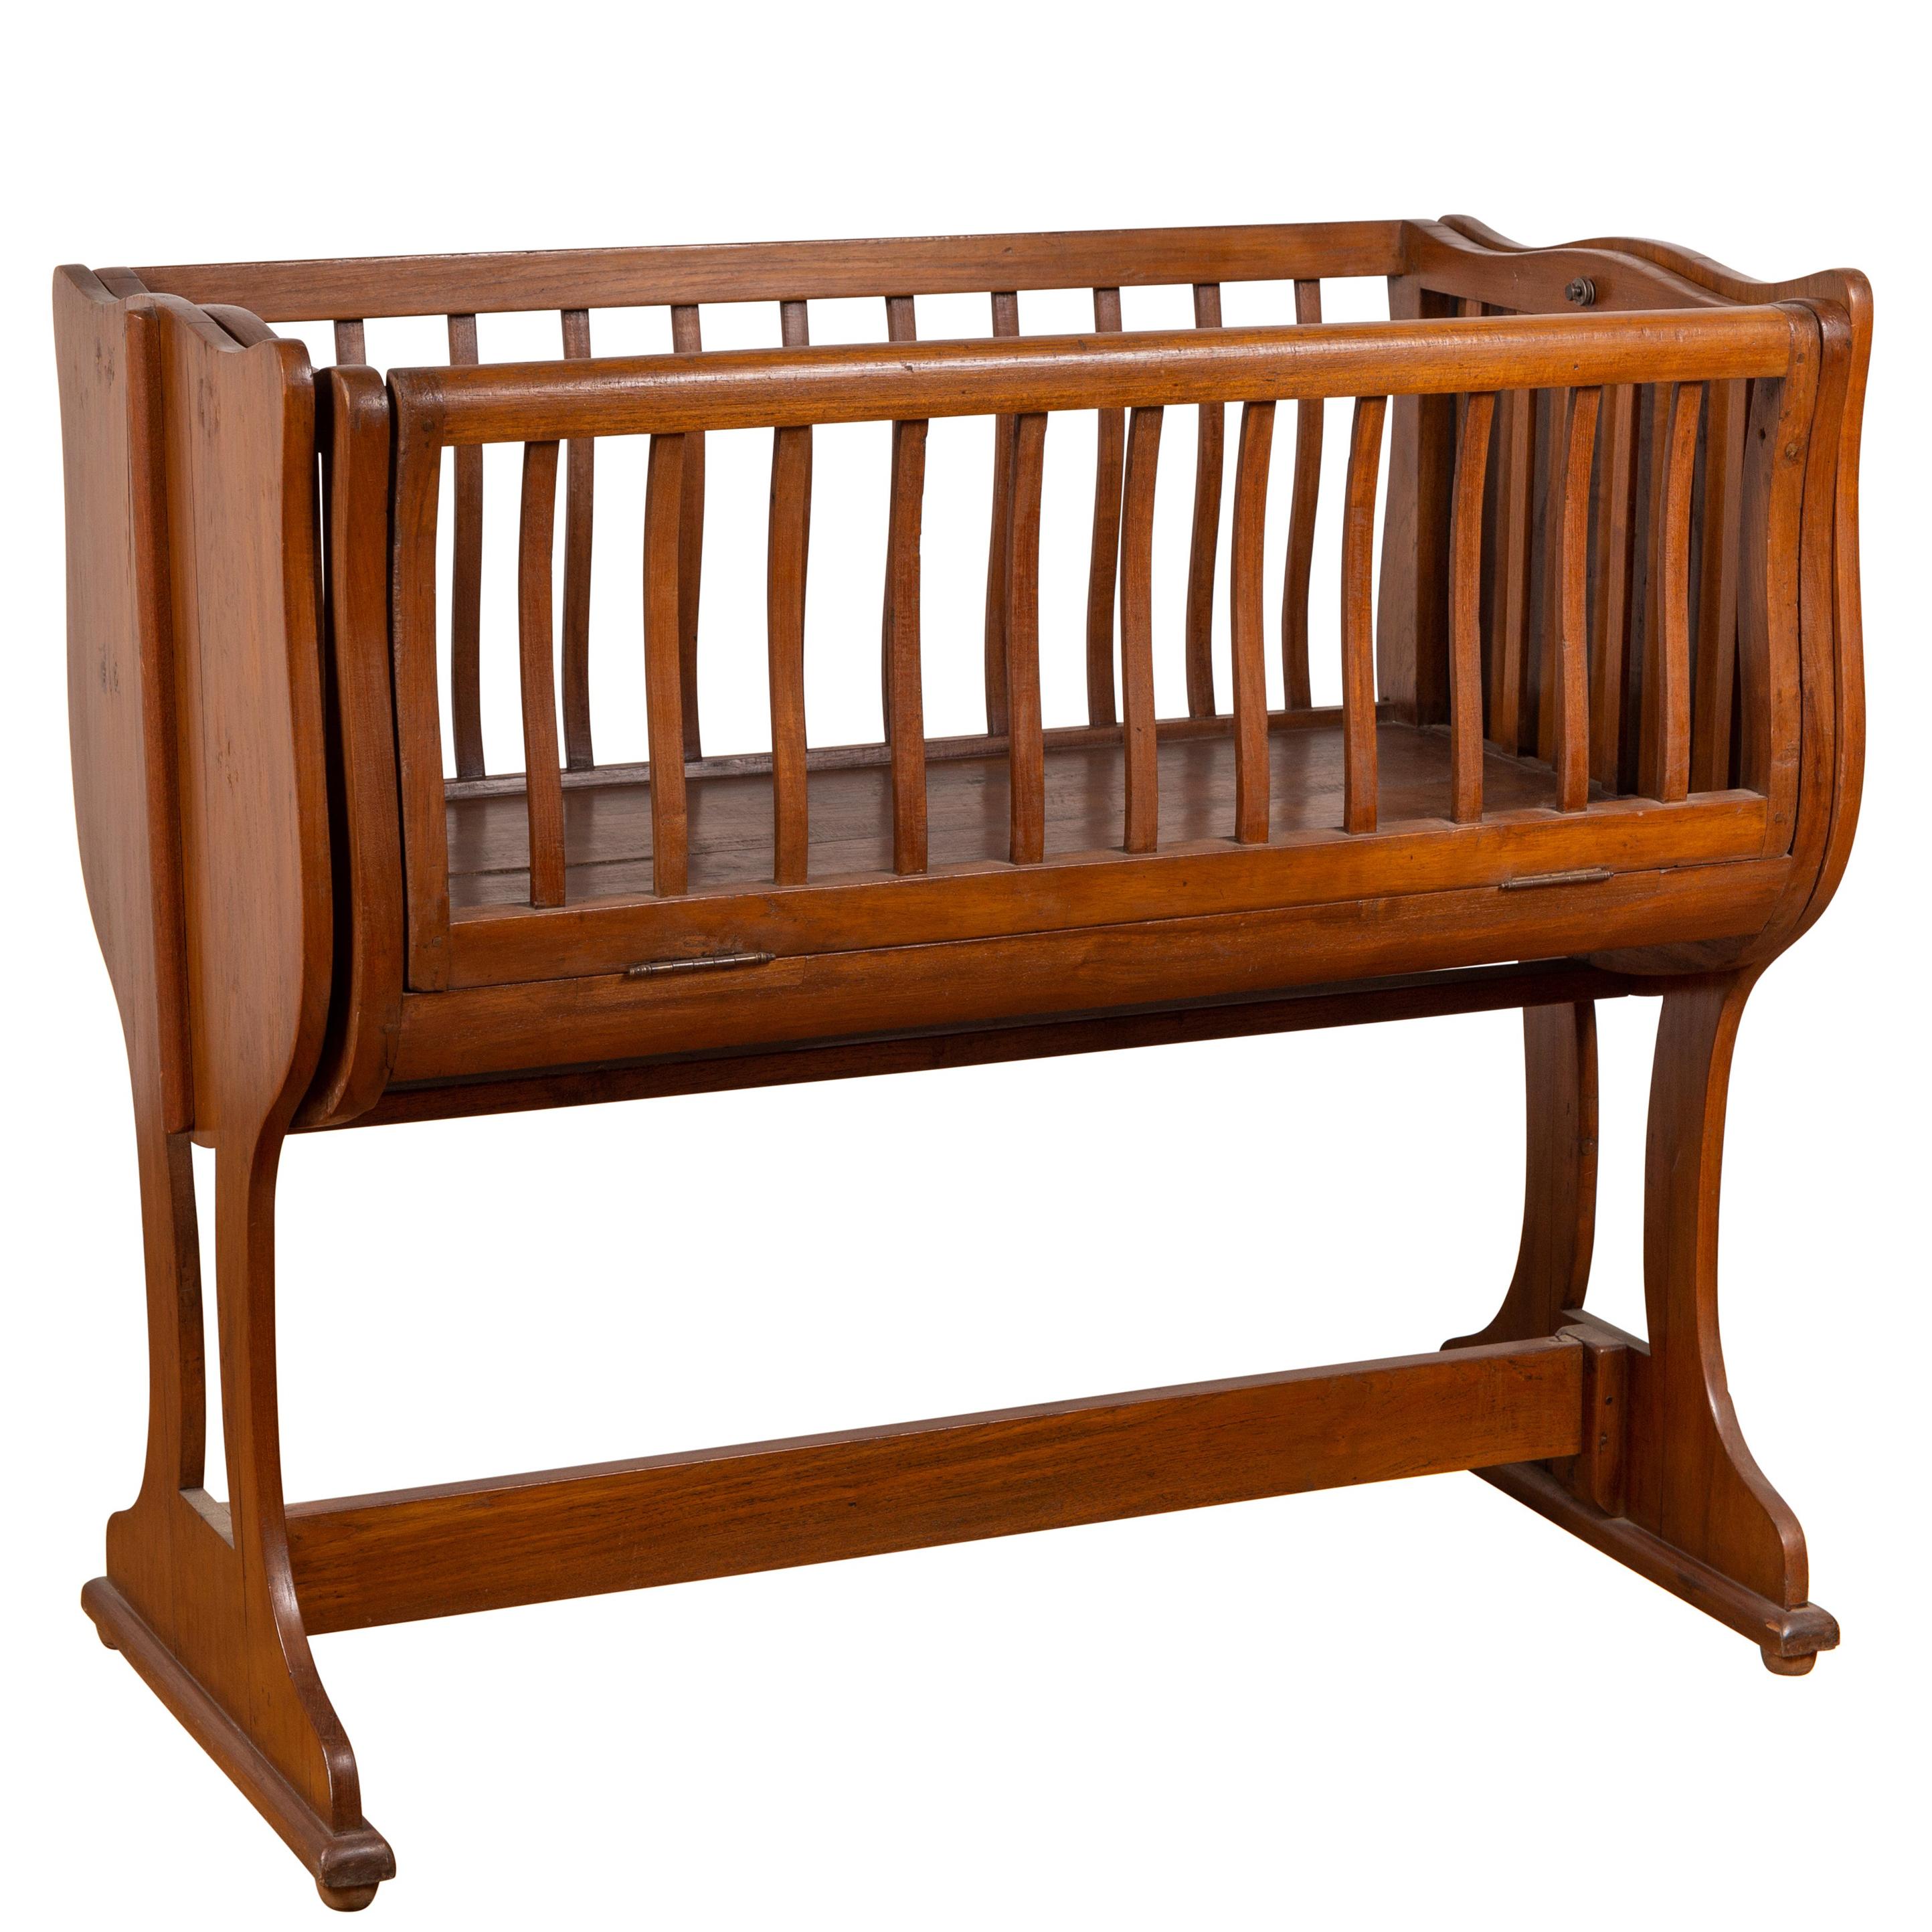 Antique Indonesian Wooden Baby Cradle Transforming into a Loveseat